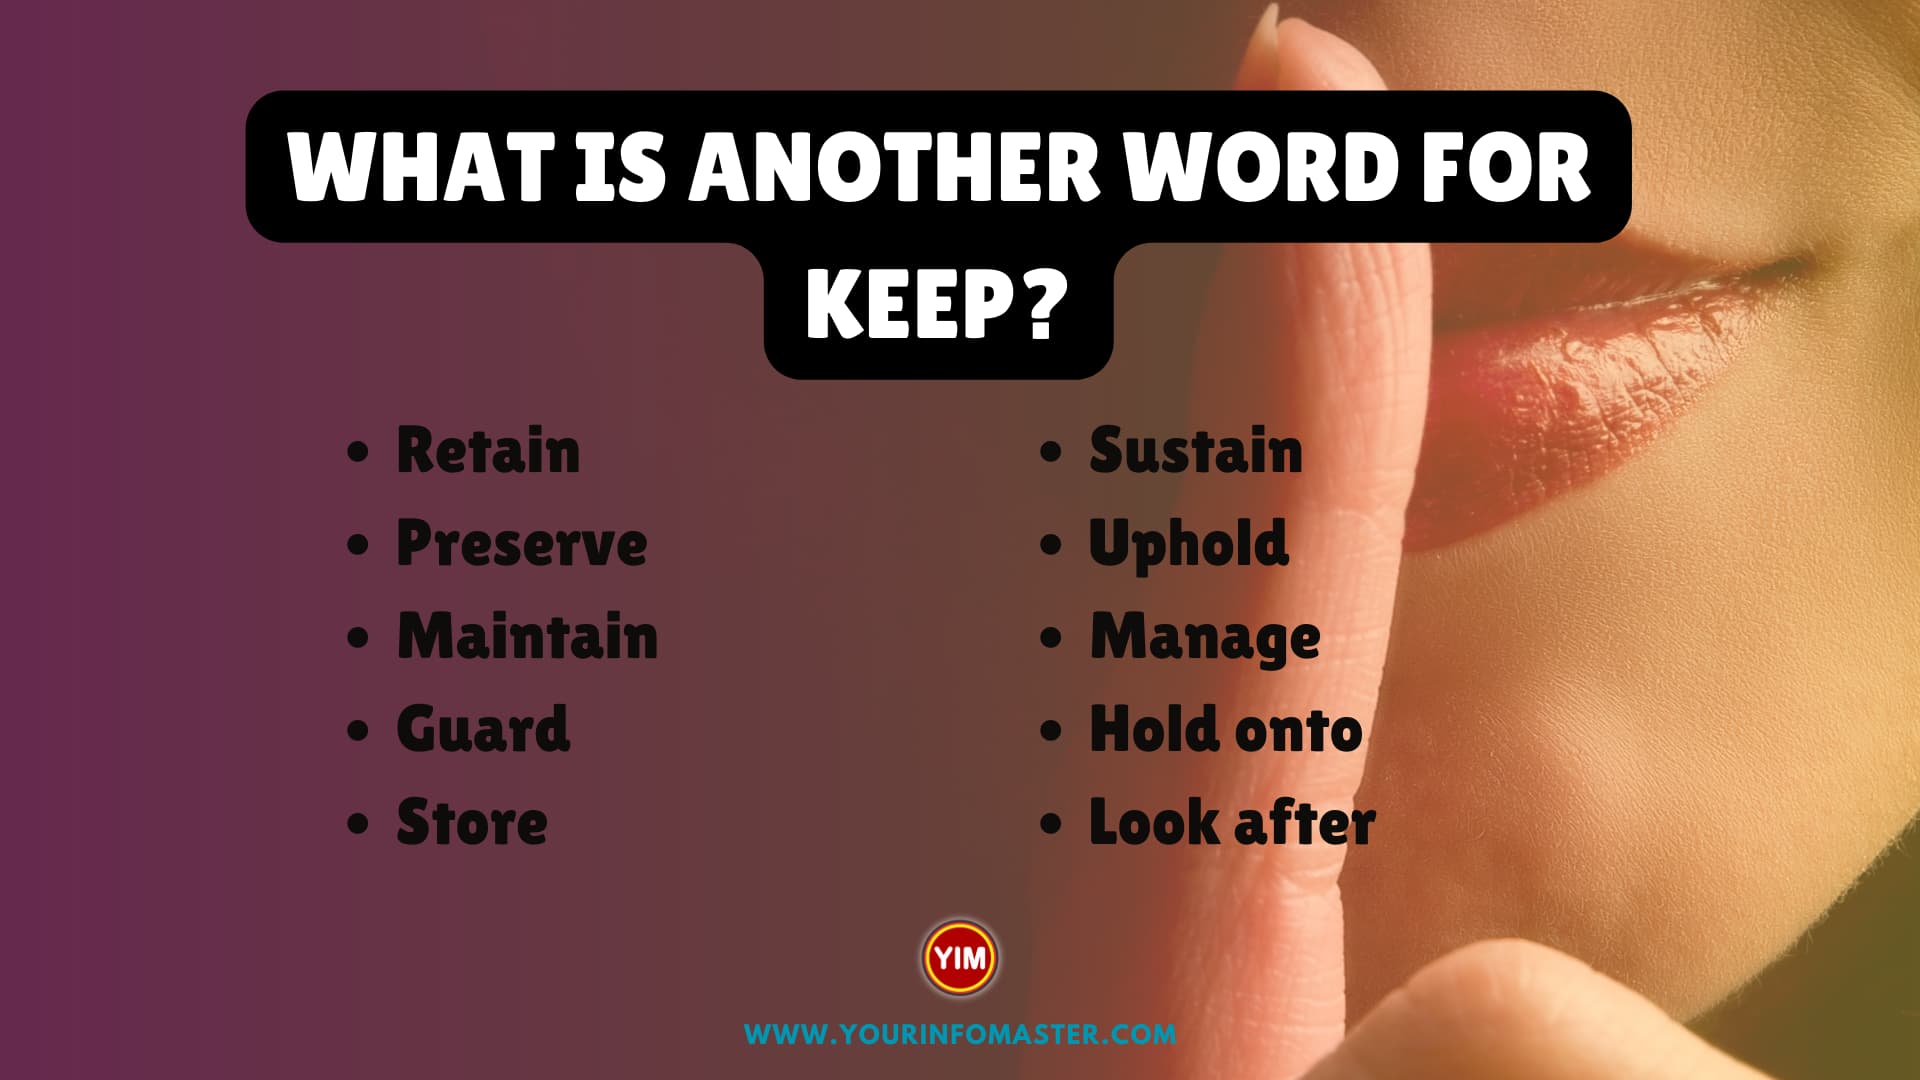 What is another word for Keep